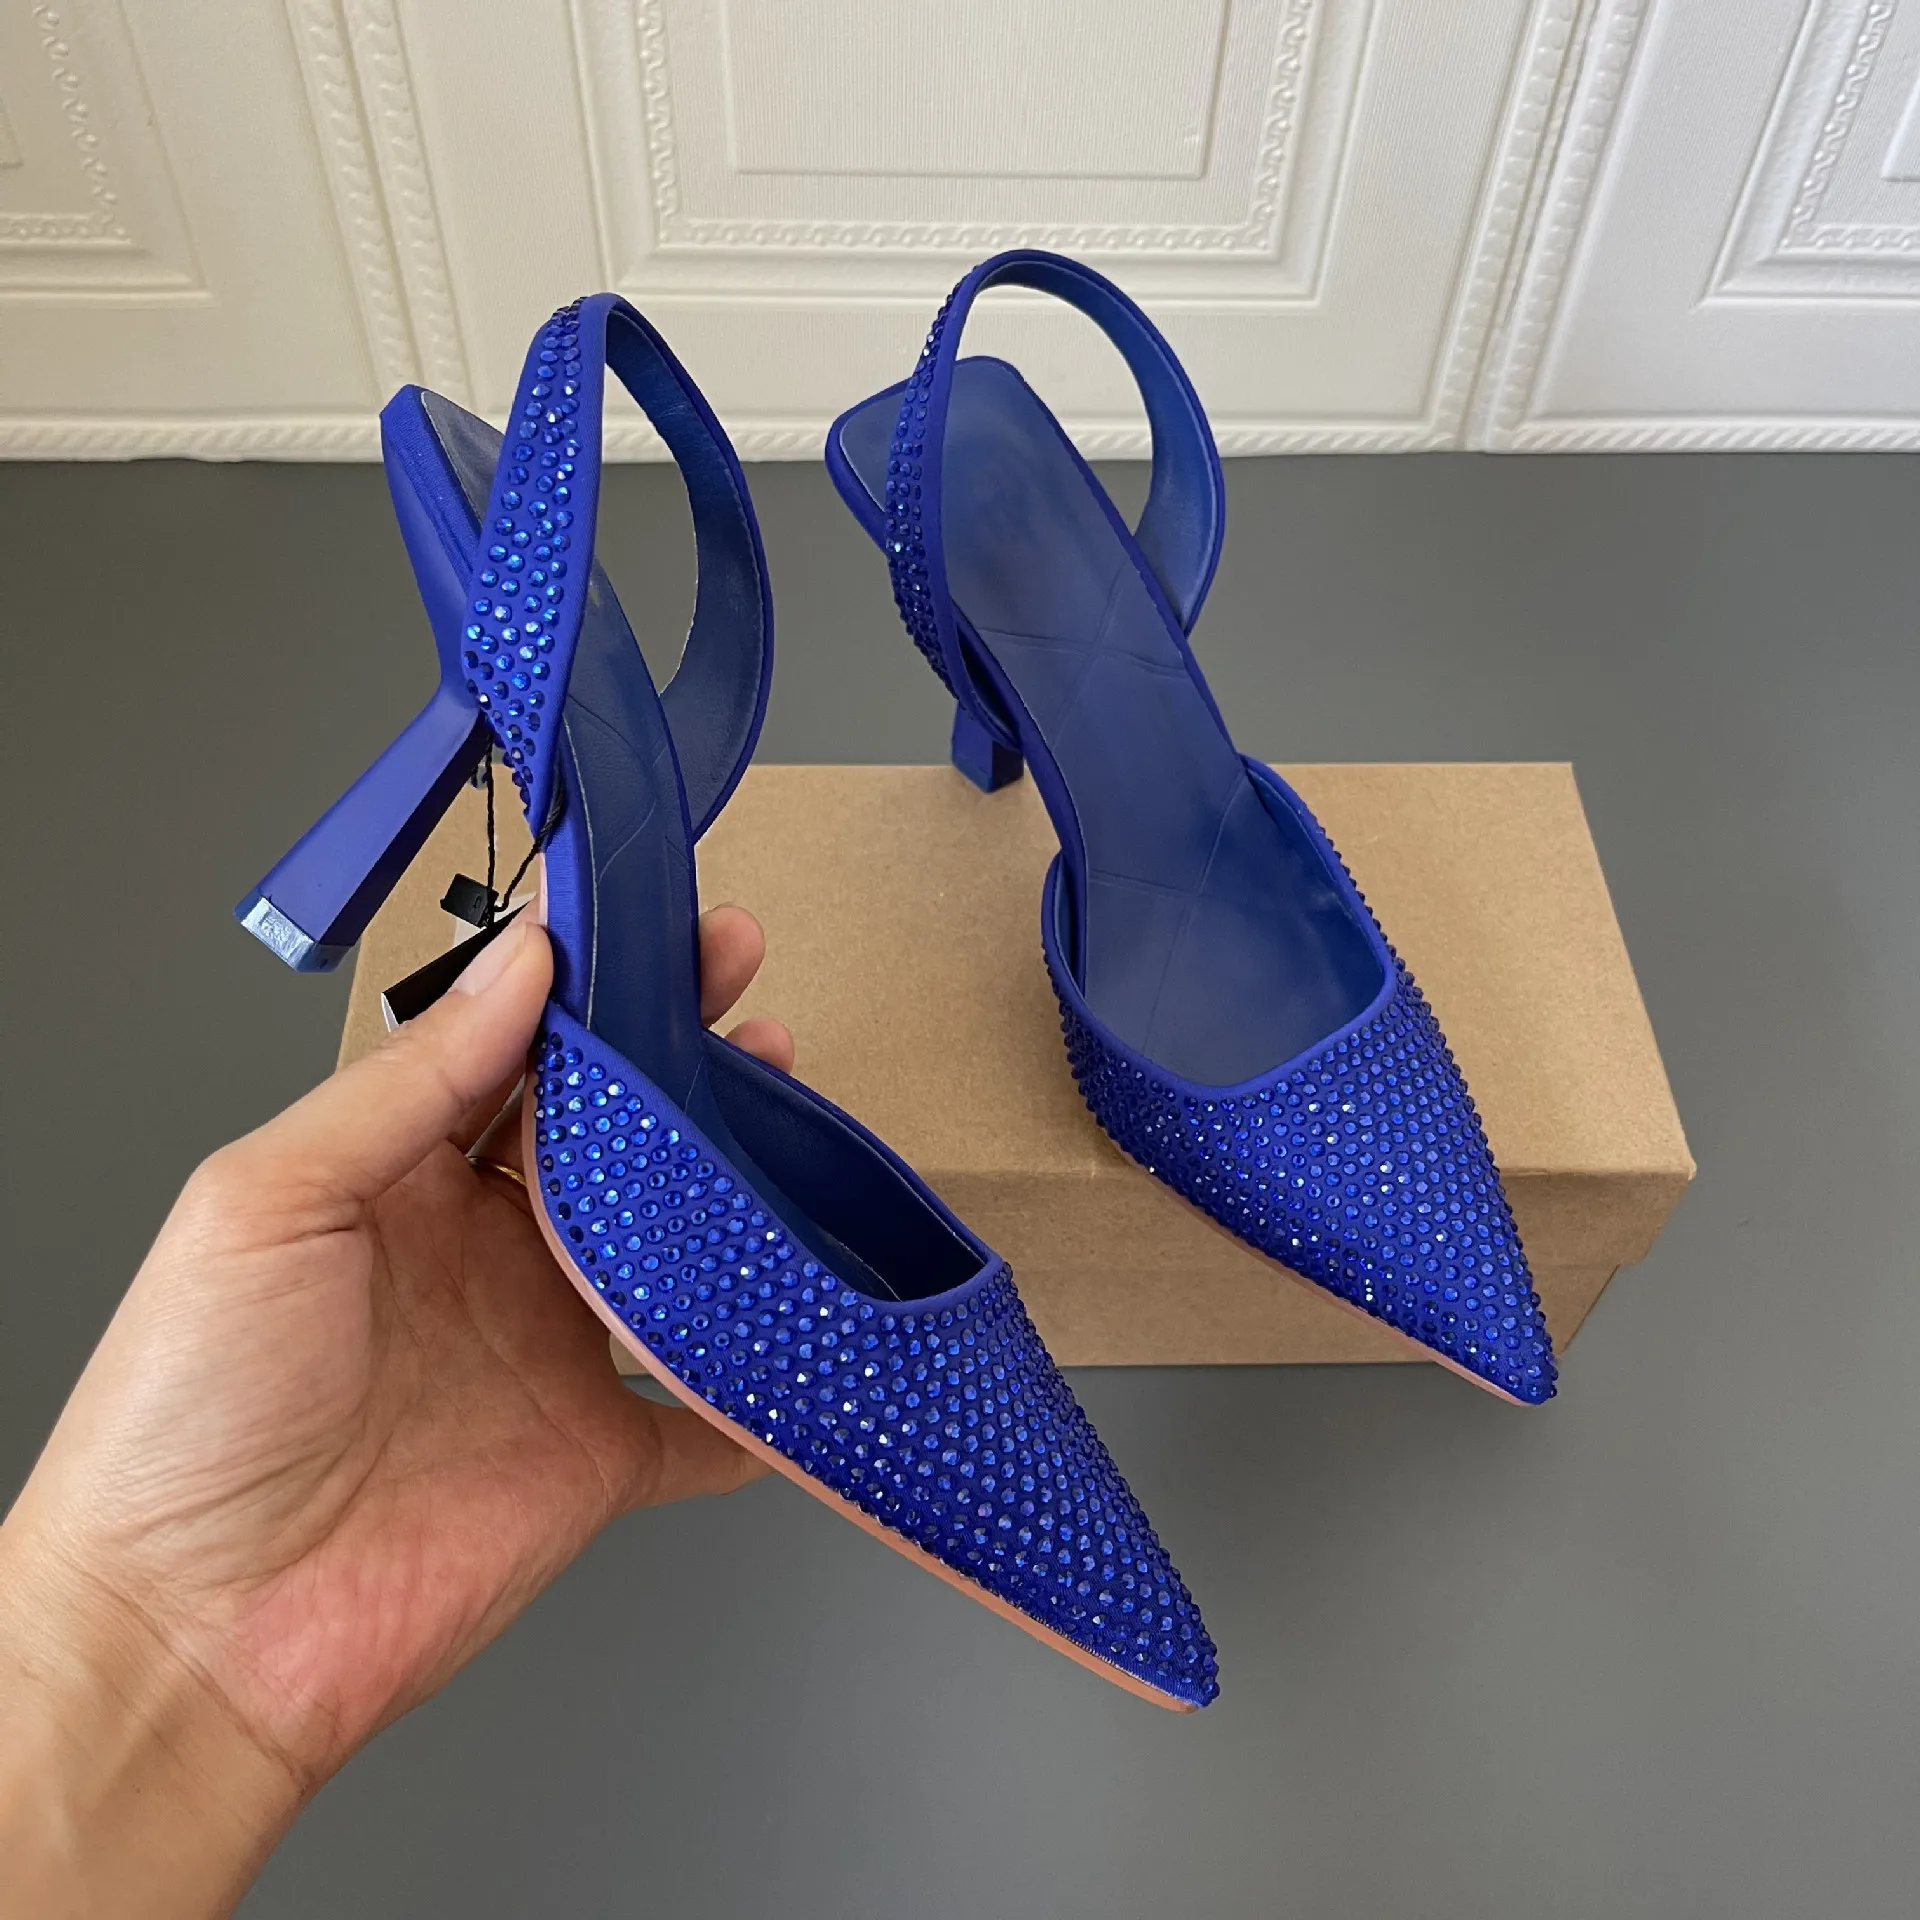 

Sequine High Heels Sexy Women Mules Slingback Sandals Pointed Toe Slip On Sandals Woman Prom Party Shoes Heeled Stiletto Pumps